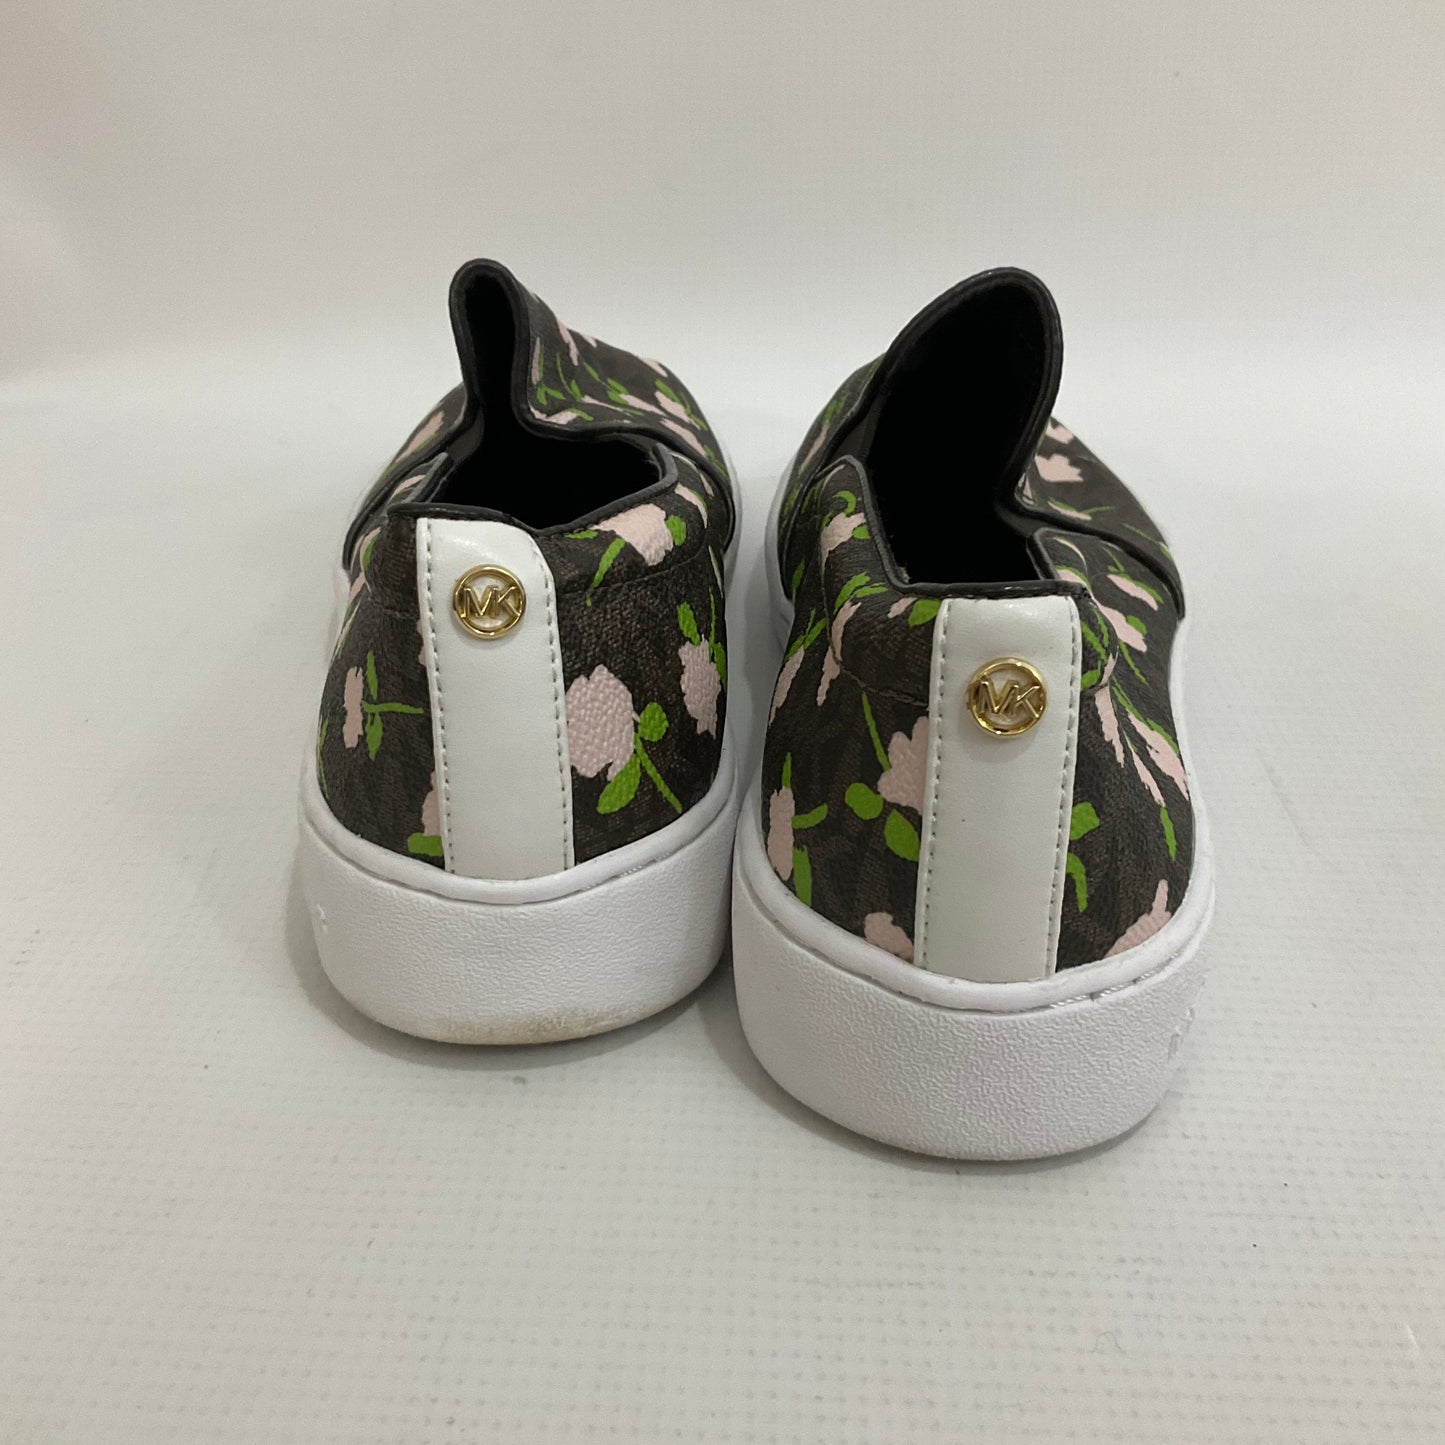 Shoes Sneakers By Michael Kors  Size: 9.5